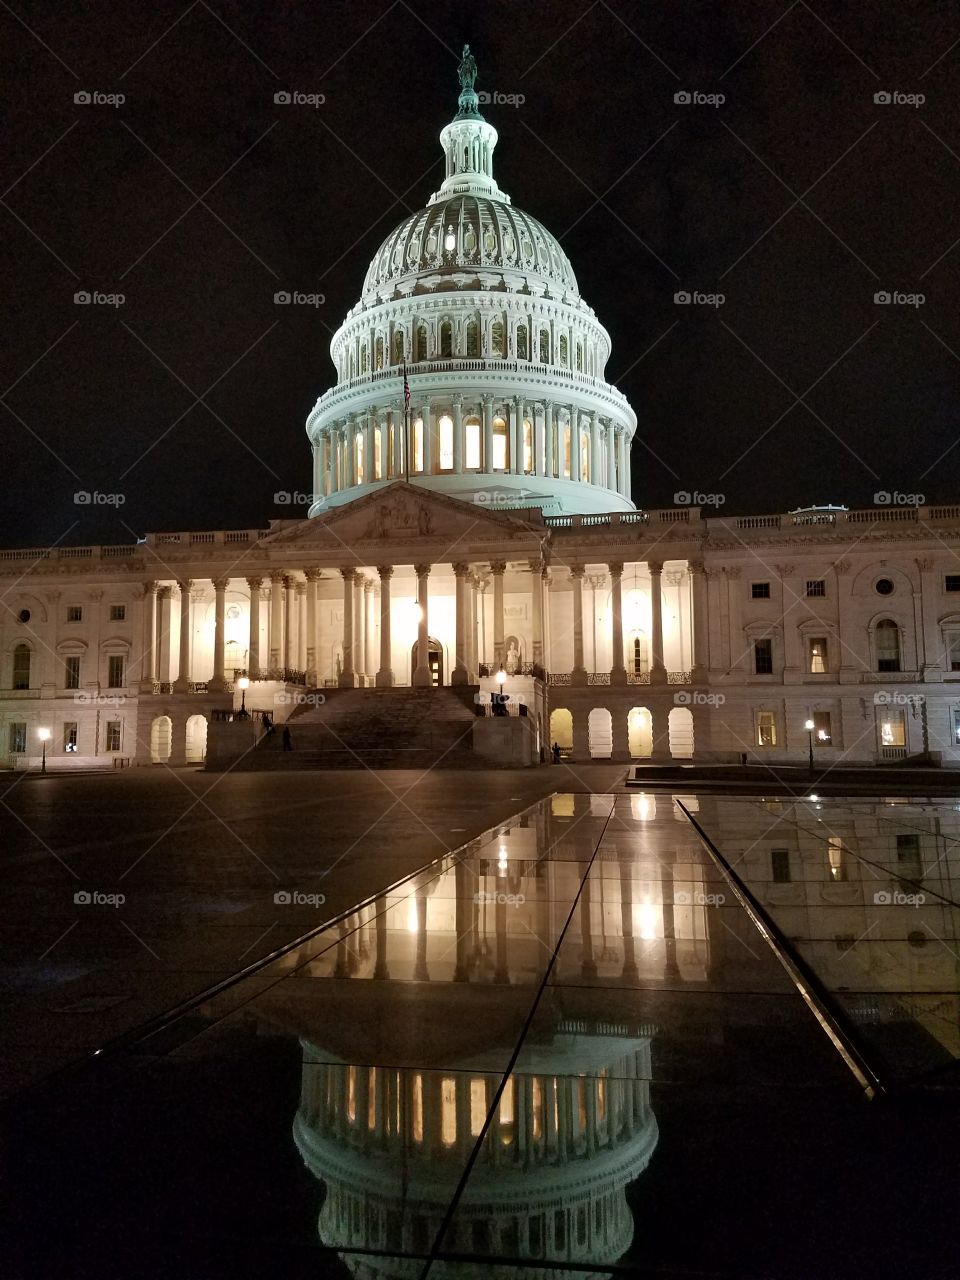 Capitol Building at night with reflection of the dome in a puddle of water. Washington, DC